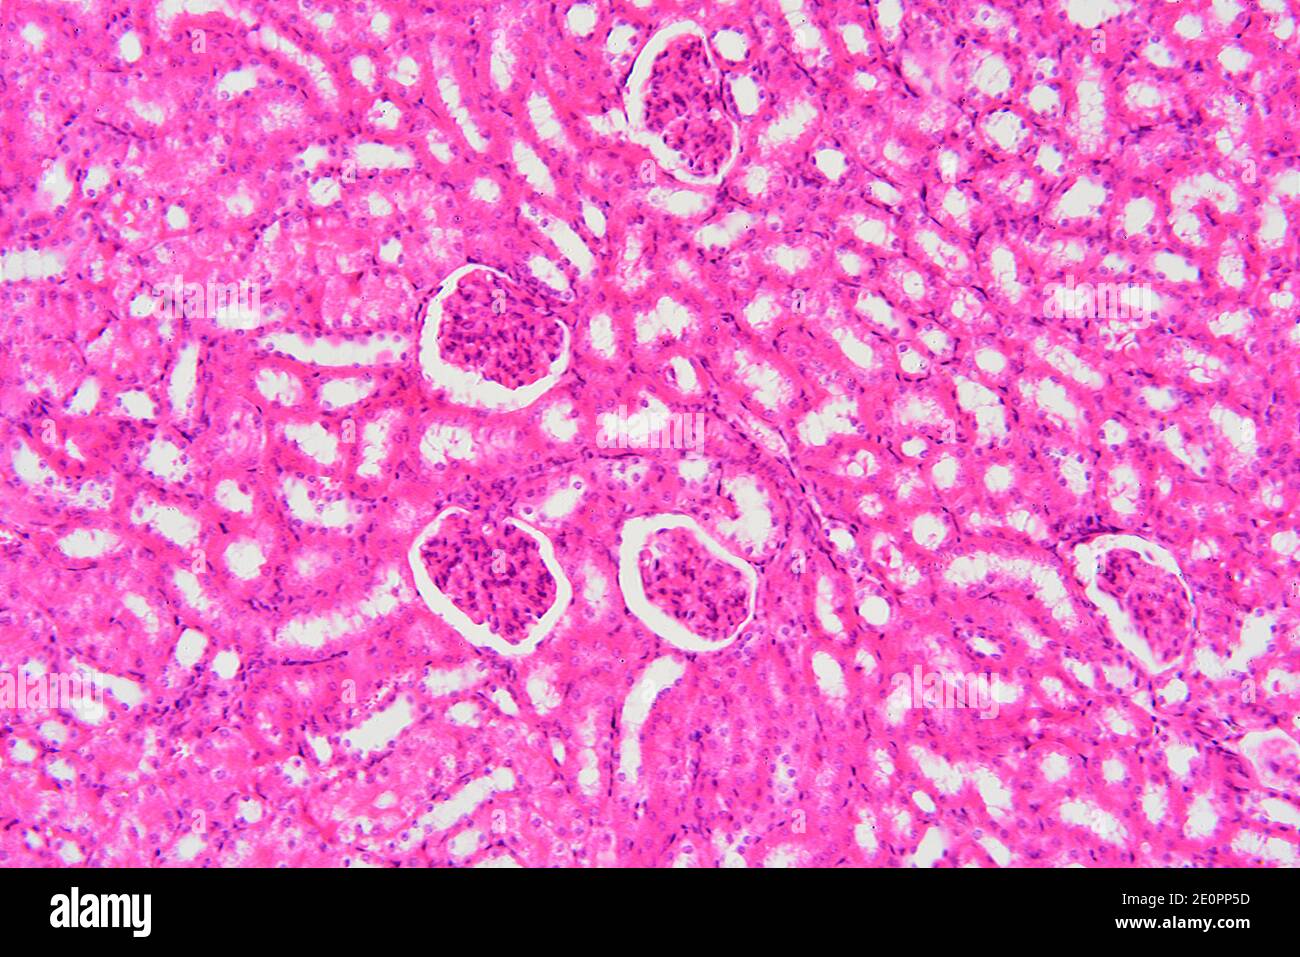 Human kidney section showing glomeruli, Malpighian corpuscles and parenchyma. X125 at 10 cm wide. Stock Photo